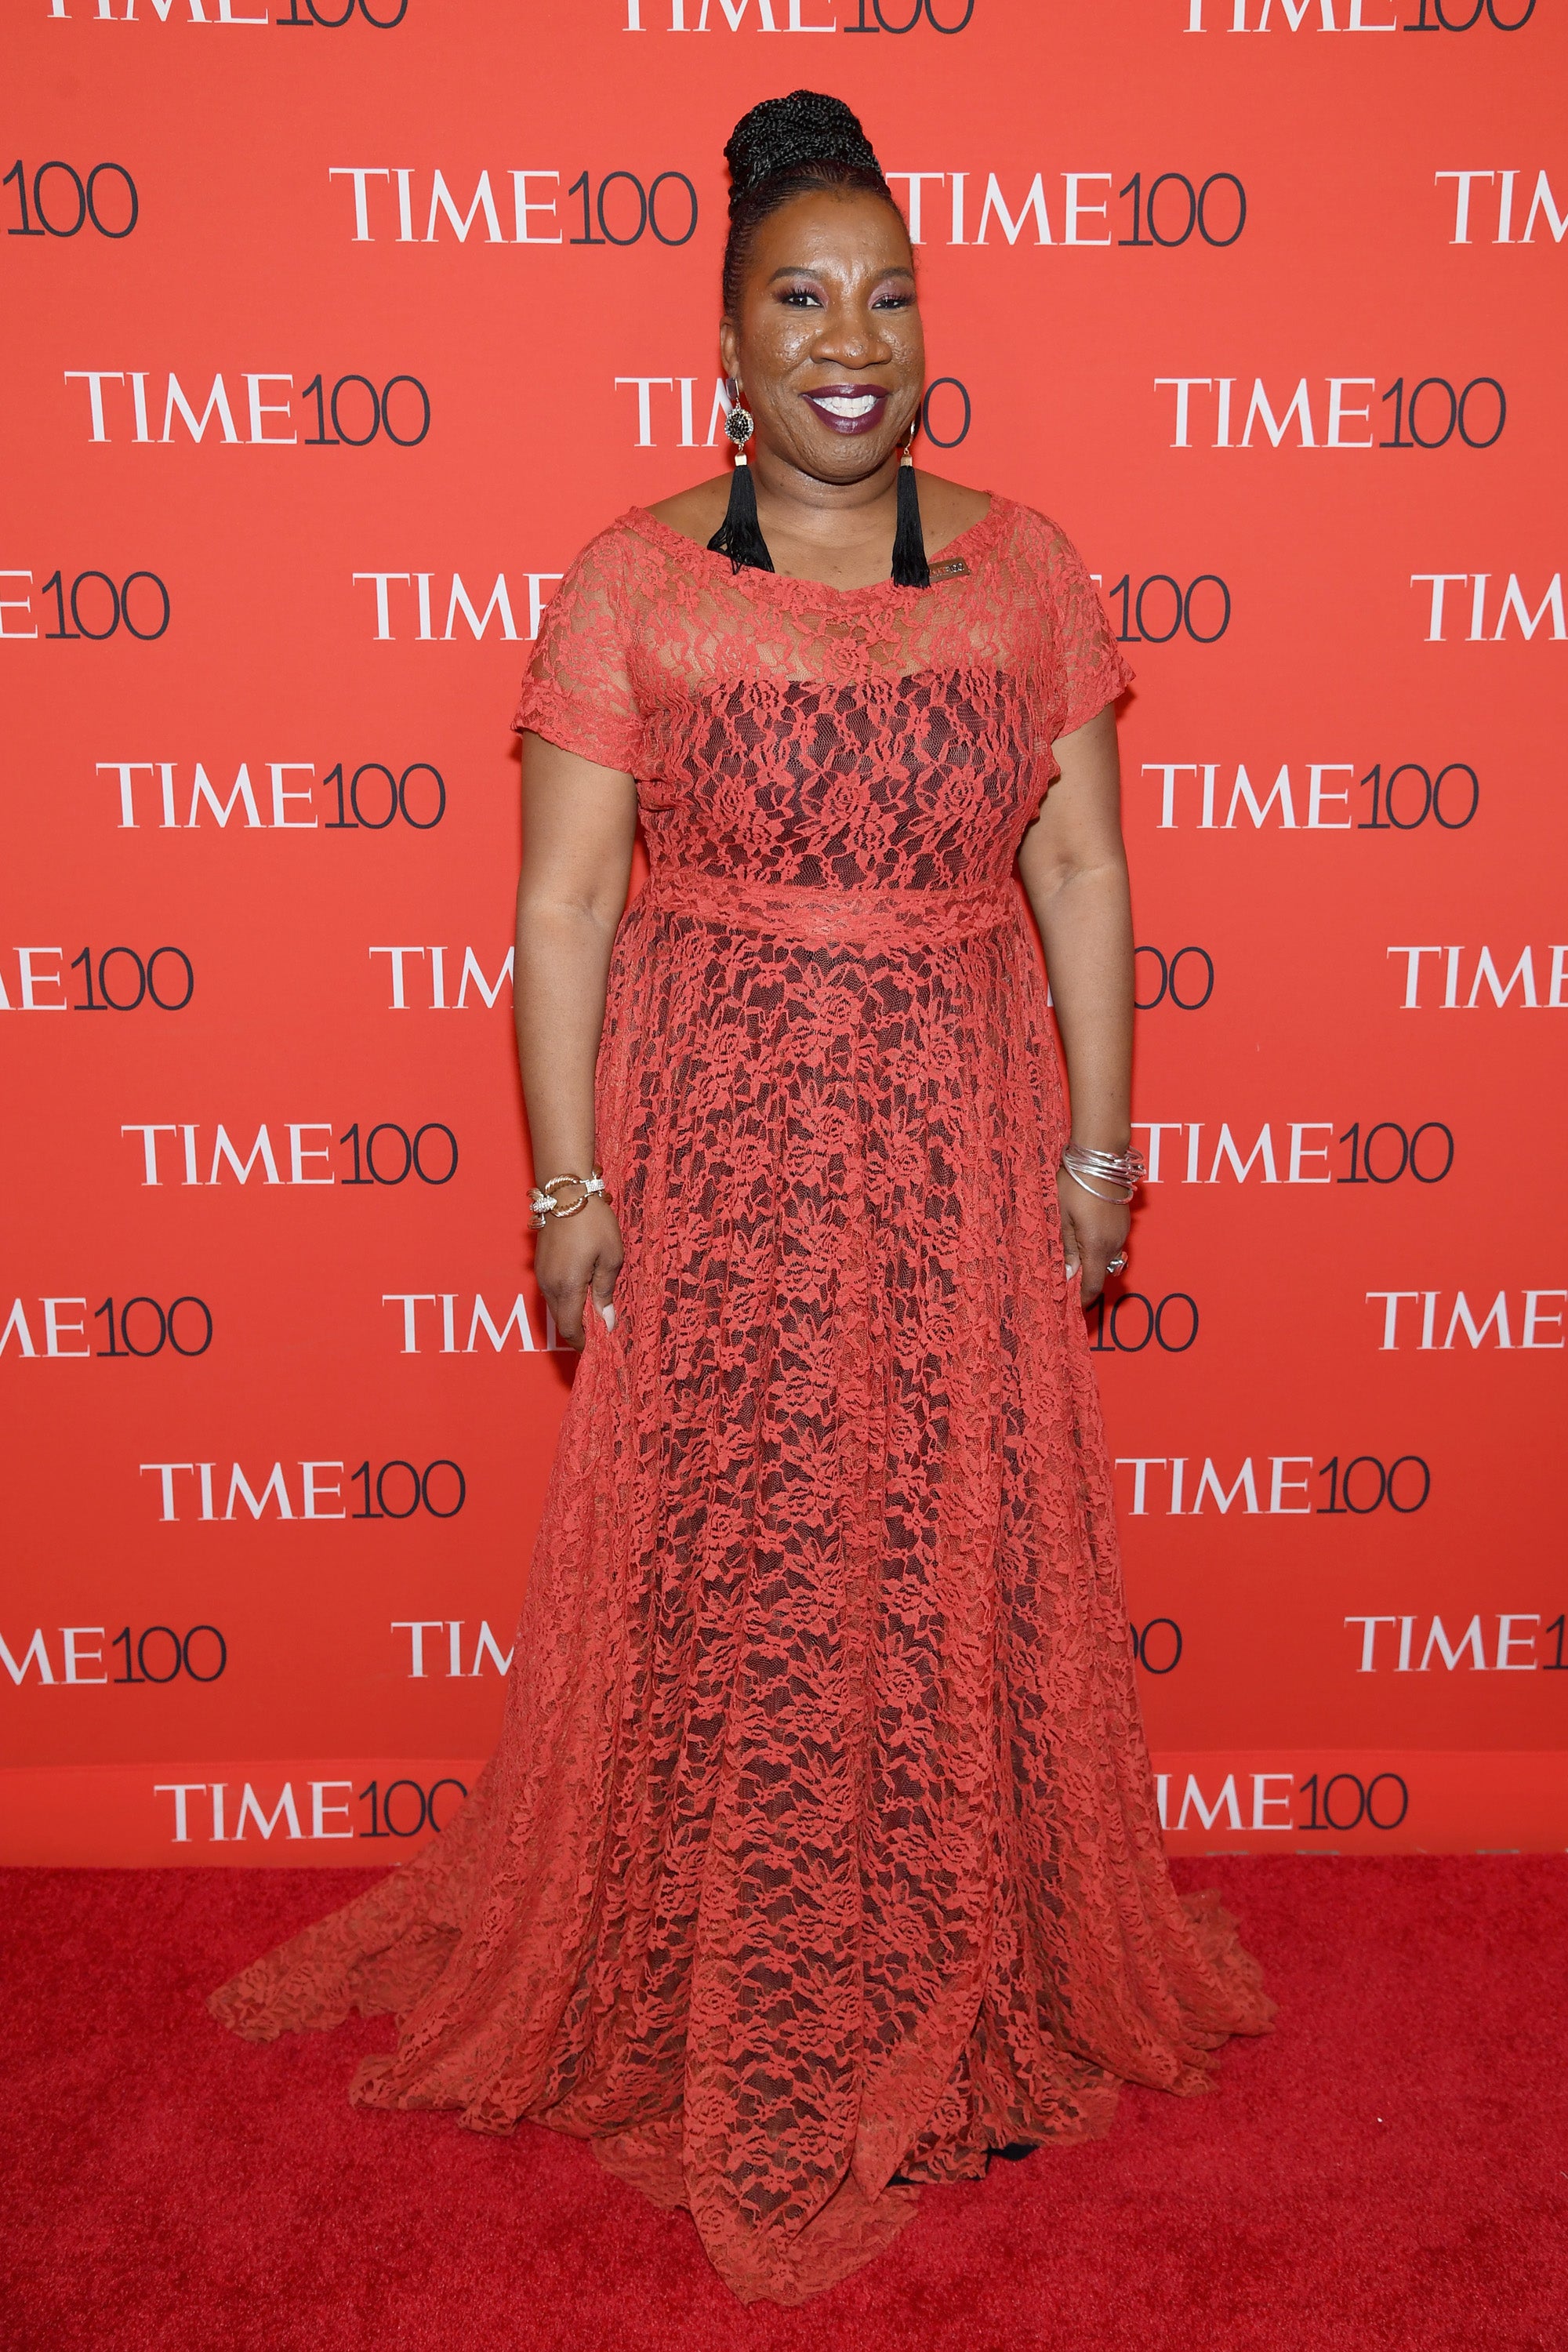 ICYMI: Lena Waithe, Yara Shahidi, Sterling K Brown, Congresswoman Maxine Waters and more attend Time 100 Gala 
